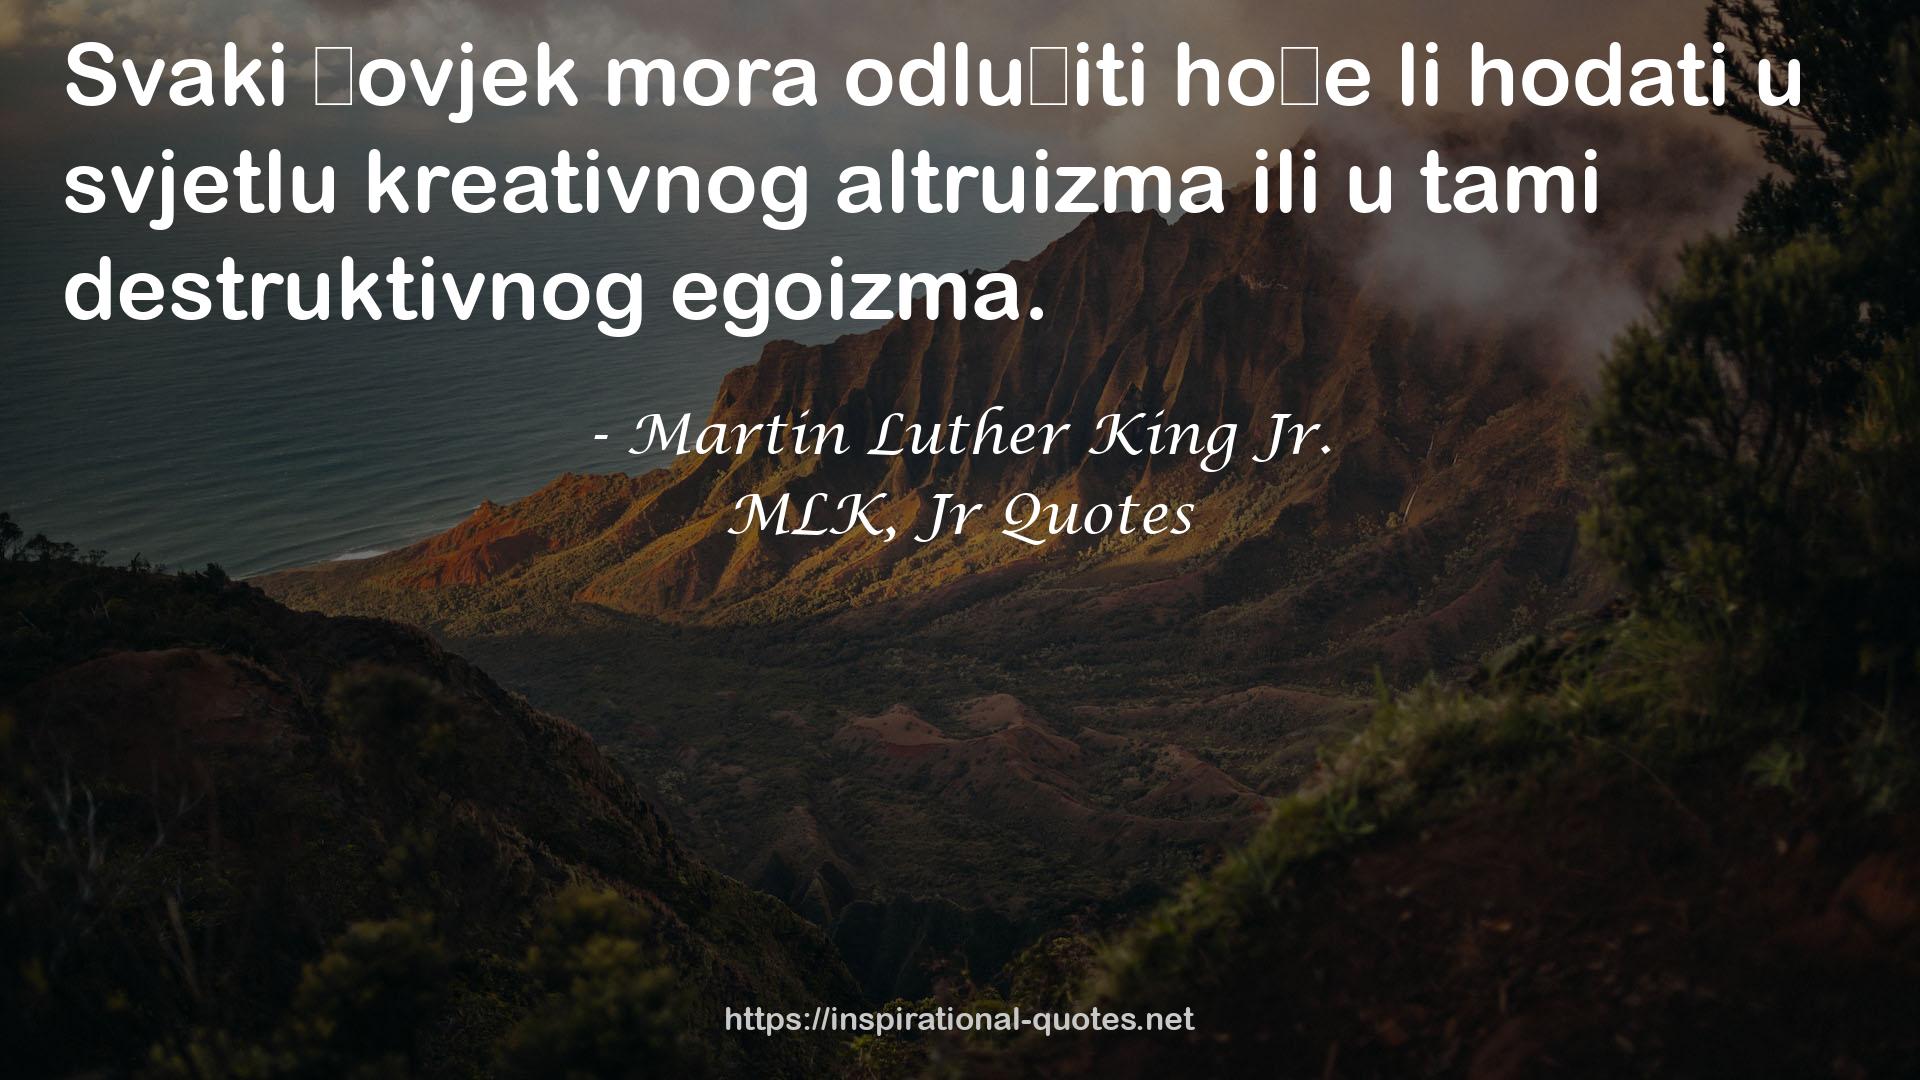 MLK, Jr Quotes QUOTES